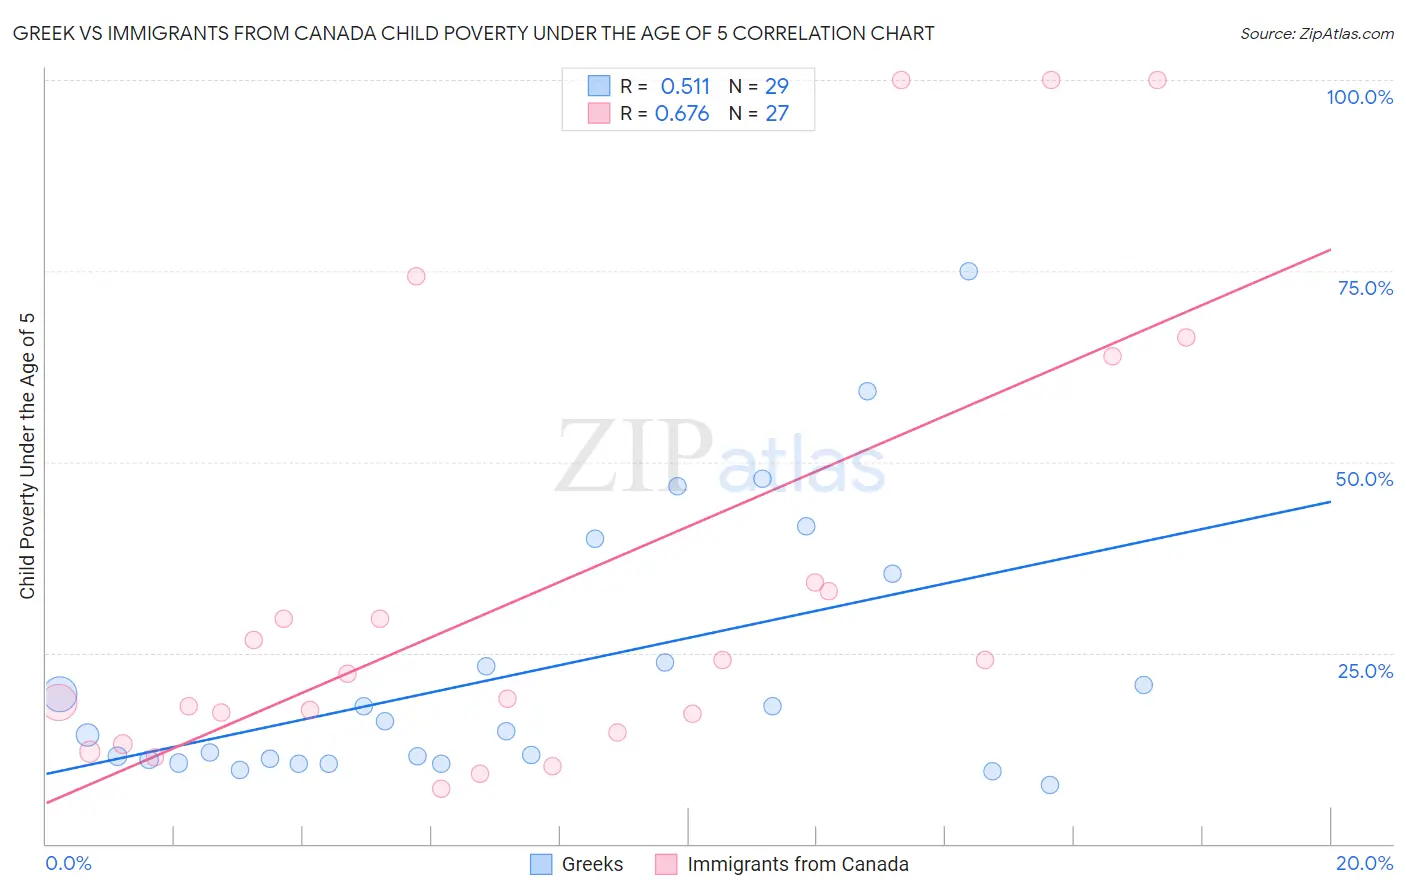 Greek vs Immigrants from Canada Child Poverty Under the Age of 5